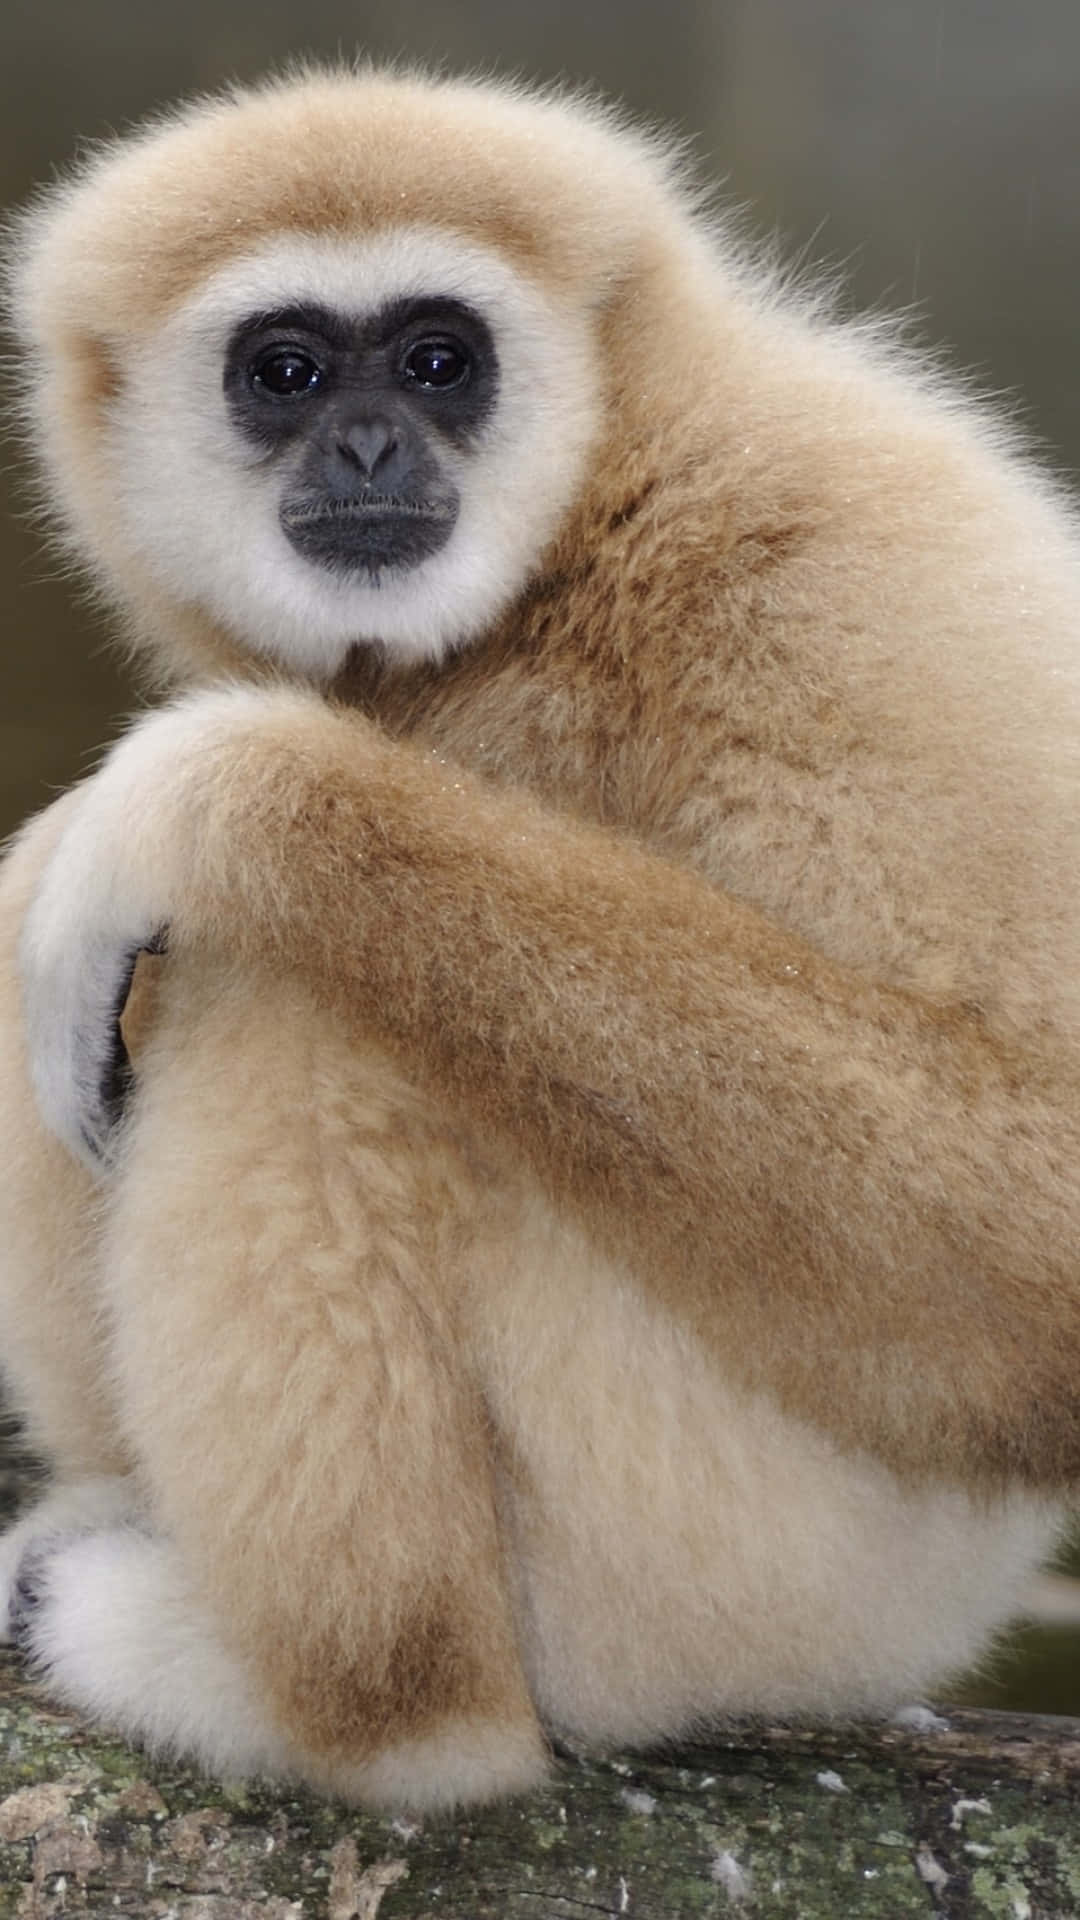 A close up of an Android Gibbon